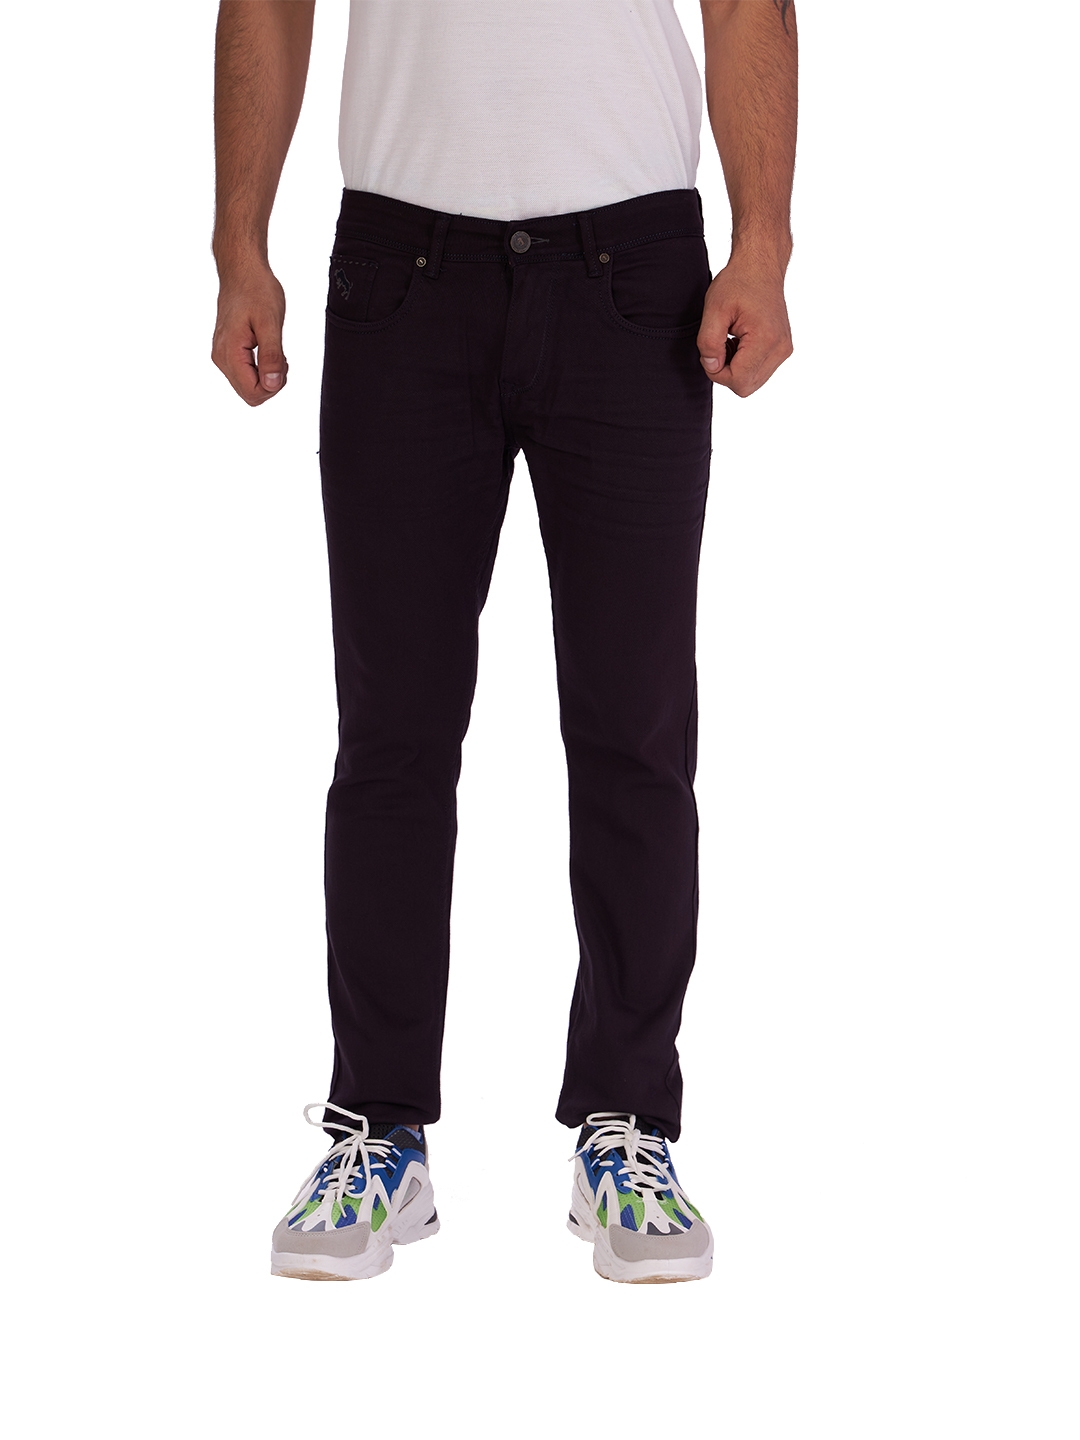 D'cot by Donear | D'cot by Donear Mens Black Cotton Jeans